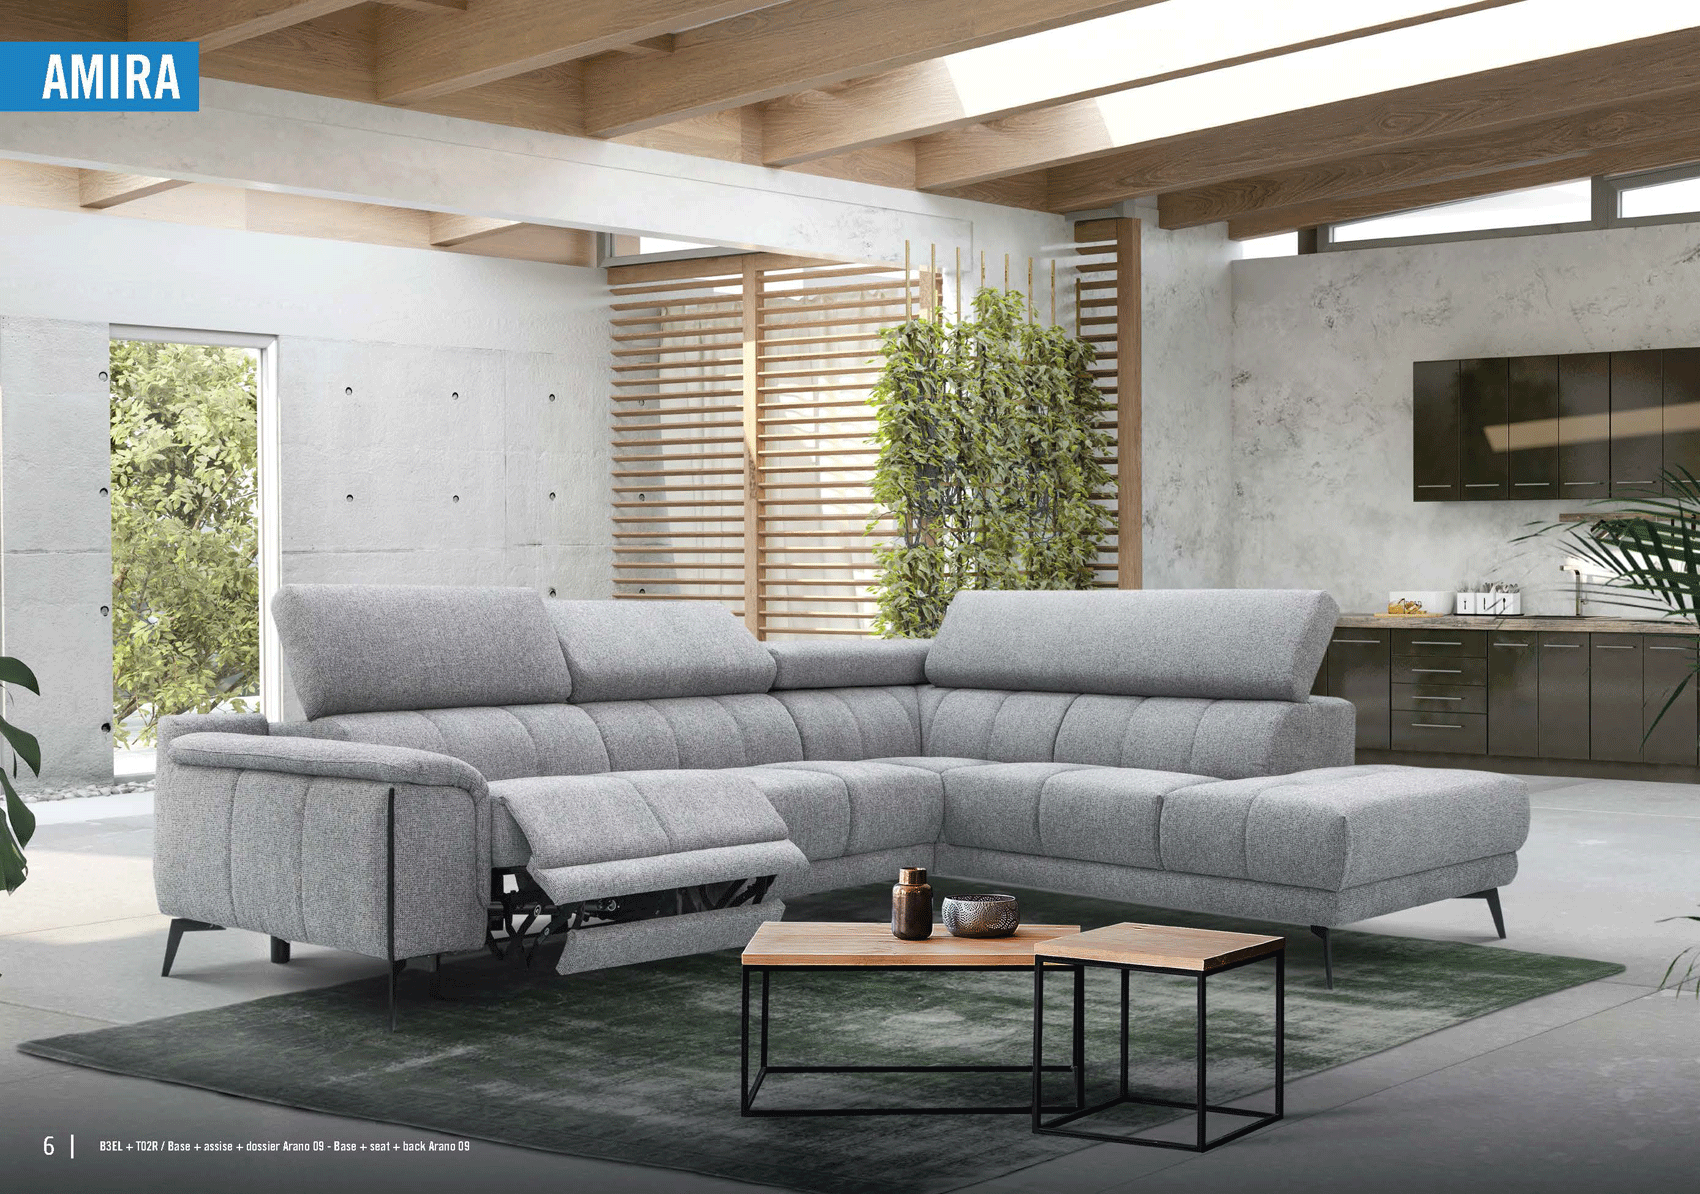 Living Room Furniture Sleepers Sofas Loveseats and Chairs Amira Sectional w/Recliner